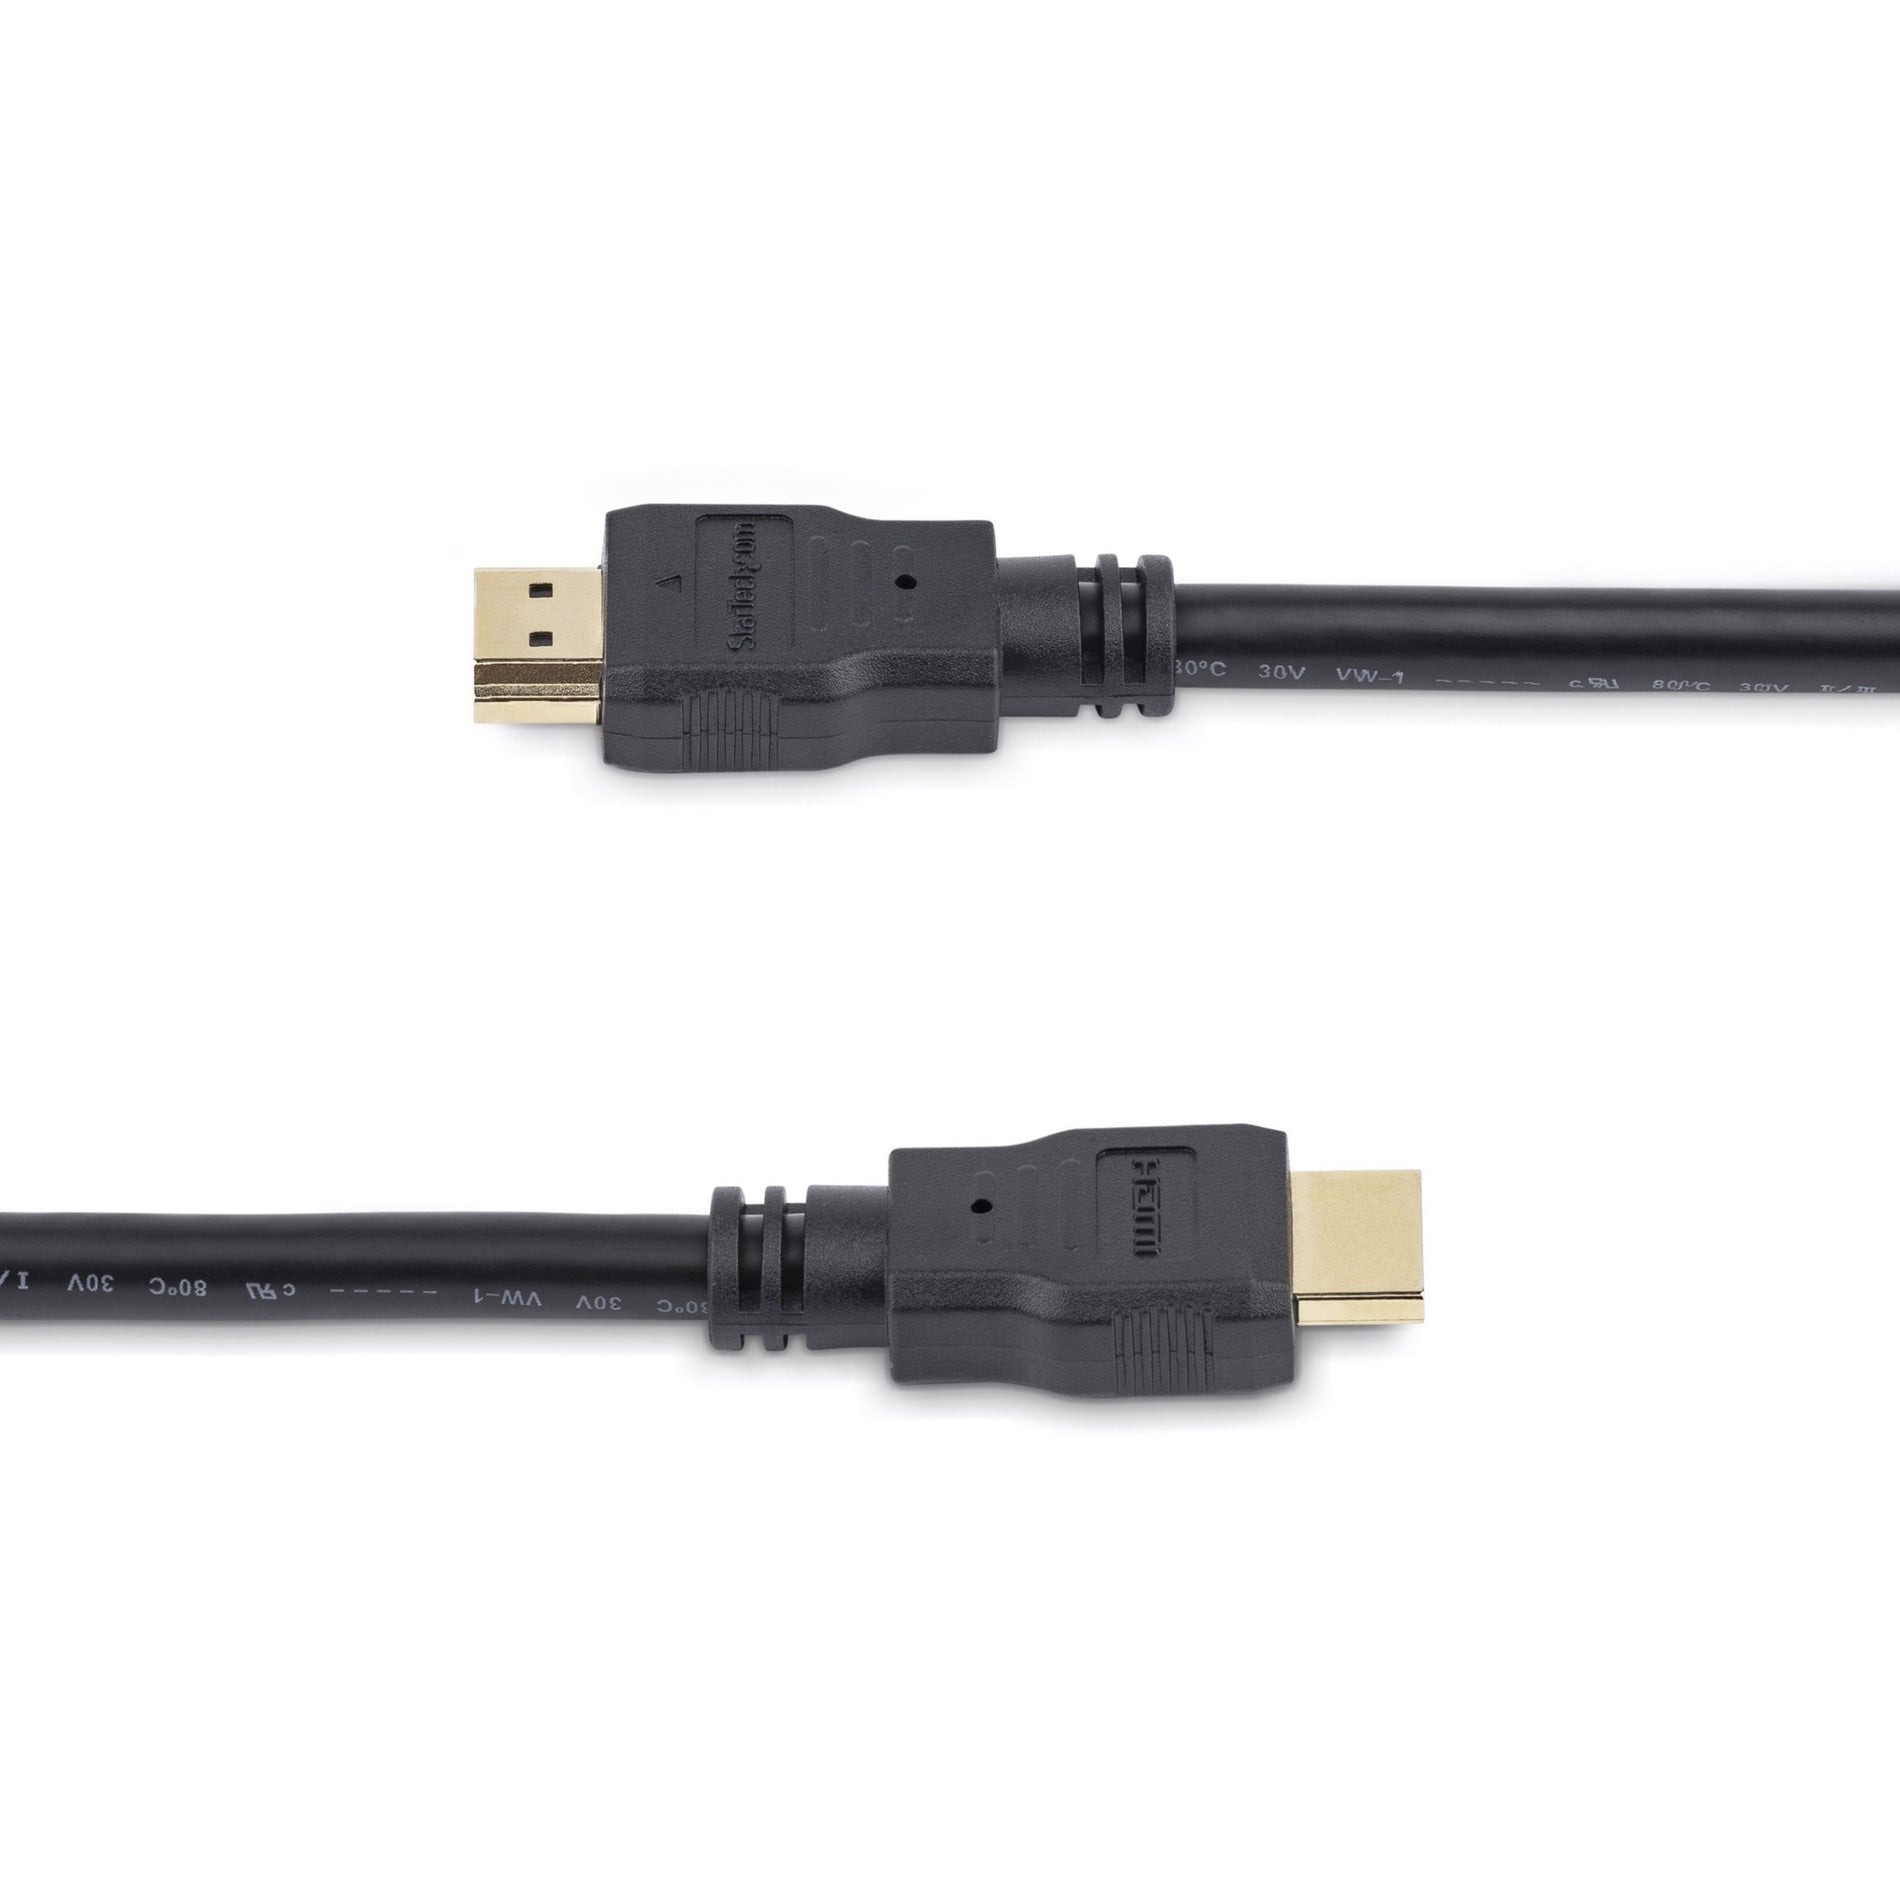 StarTech.com HDMM5M 5m High Speed HDMI Cable - Ultra HD 4k x 2k HDMI Cable, Molded, Corrosion Resistant, Strain Relief, Gold Plated Connectors